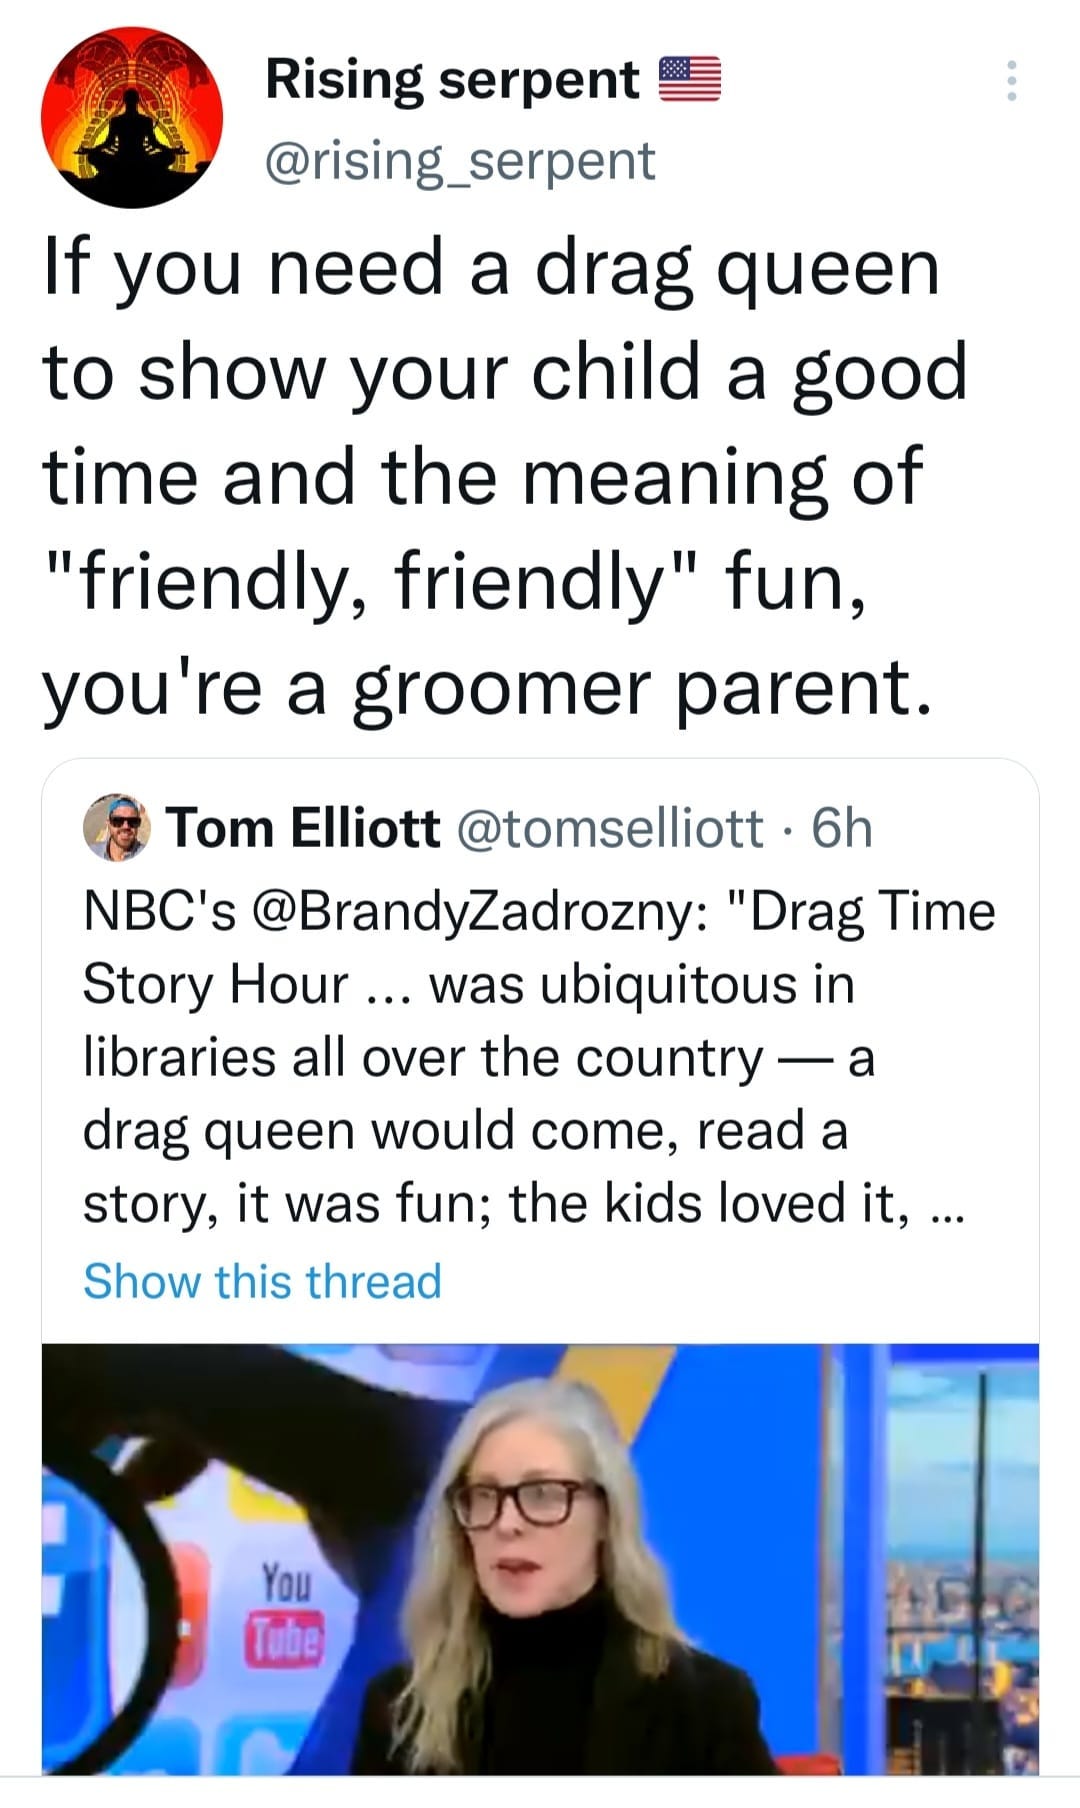 May be an image of 1 person and text that says 'Rising serpent @rising_serpent If you need a drag queen to show your child a good time and the meaning of "friendly, friendly" fun, you're a groomer parent. Tom Elliott @tomselliott 6h NBC's @BrandyZadrozny: "Drag Time Story Hour... was ubiquitous in libraries all over the country drag queen would come, read a story, it was fun; the kids loved it,... Show this thread You Tube'